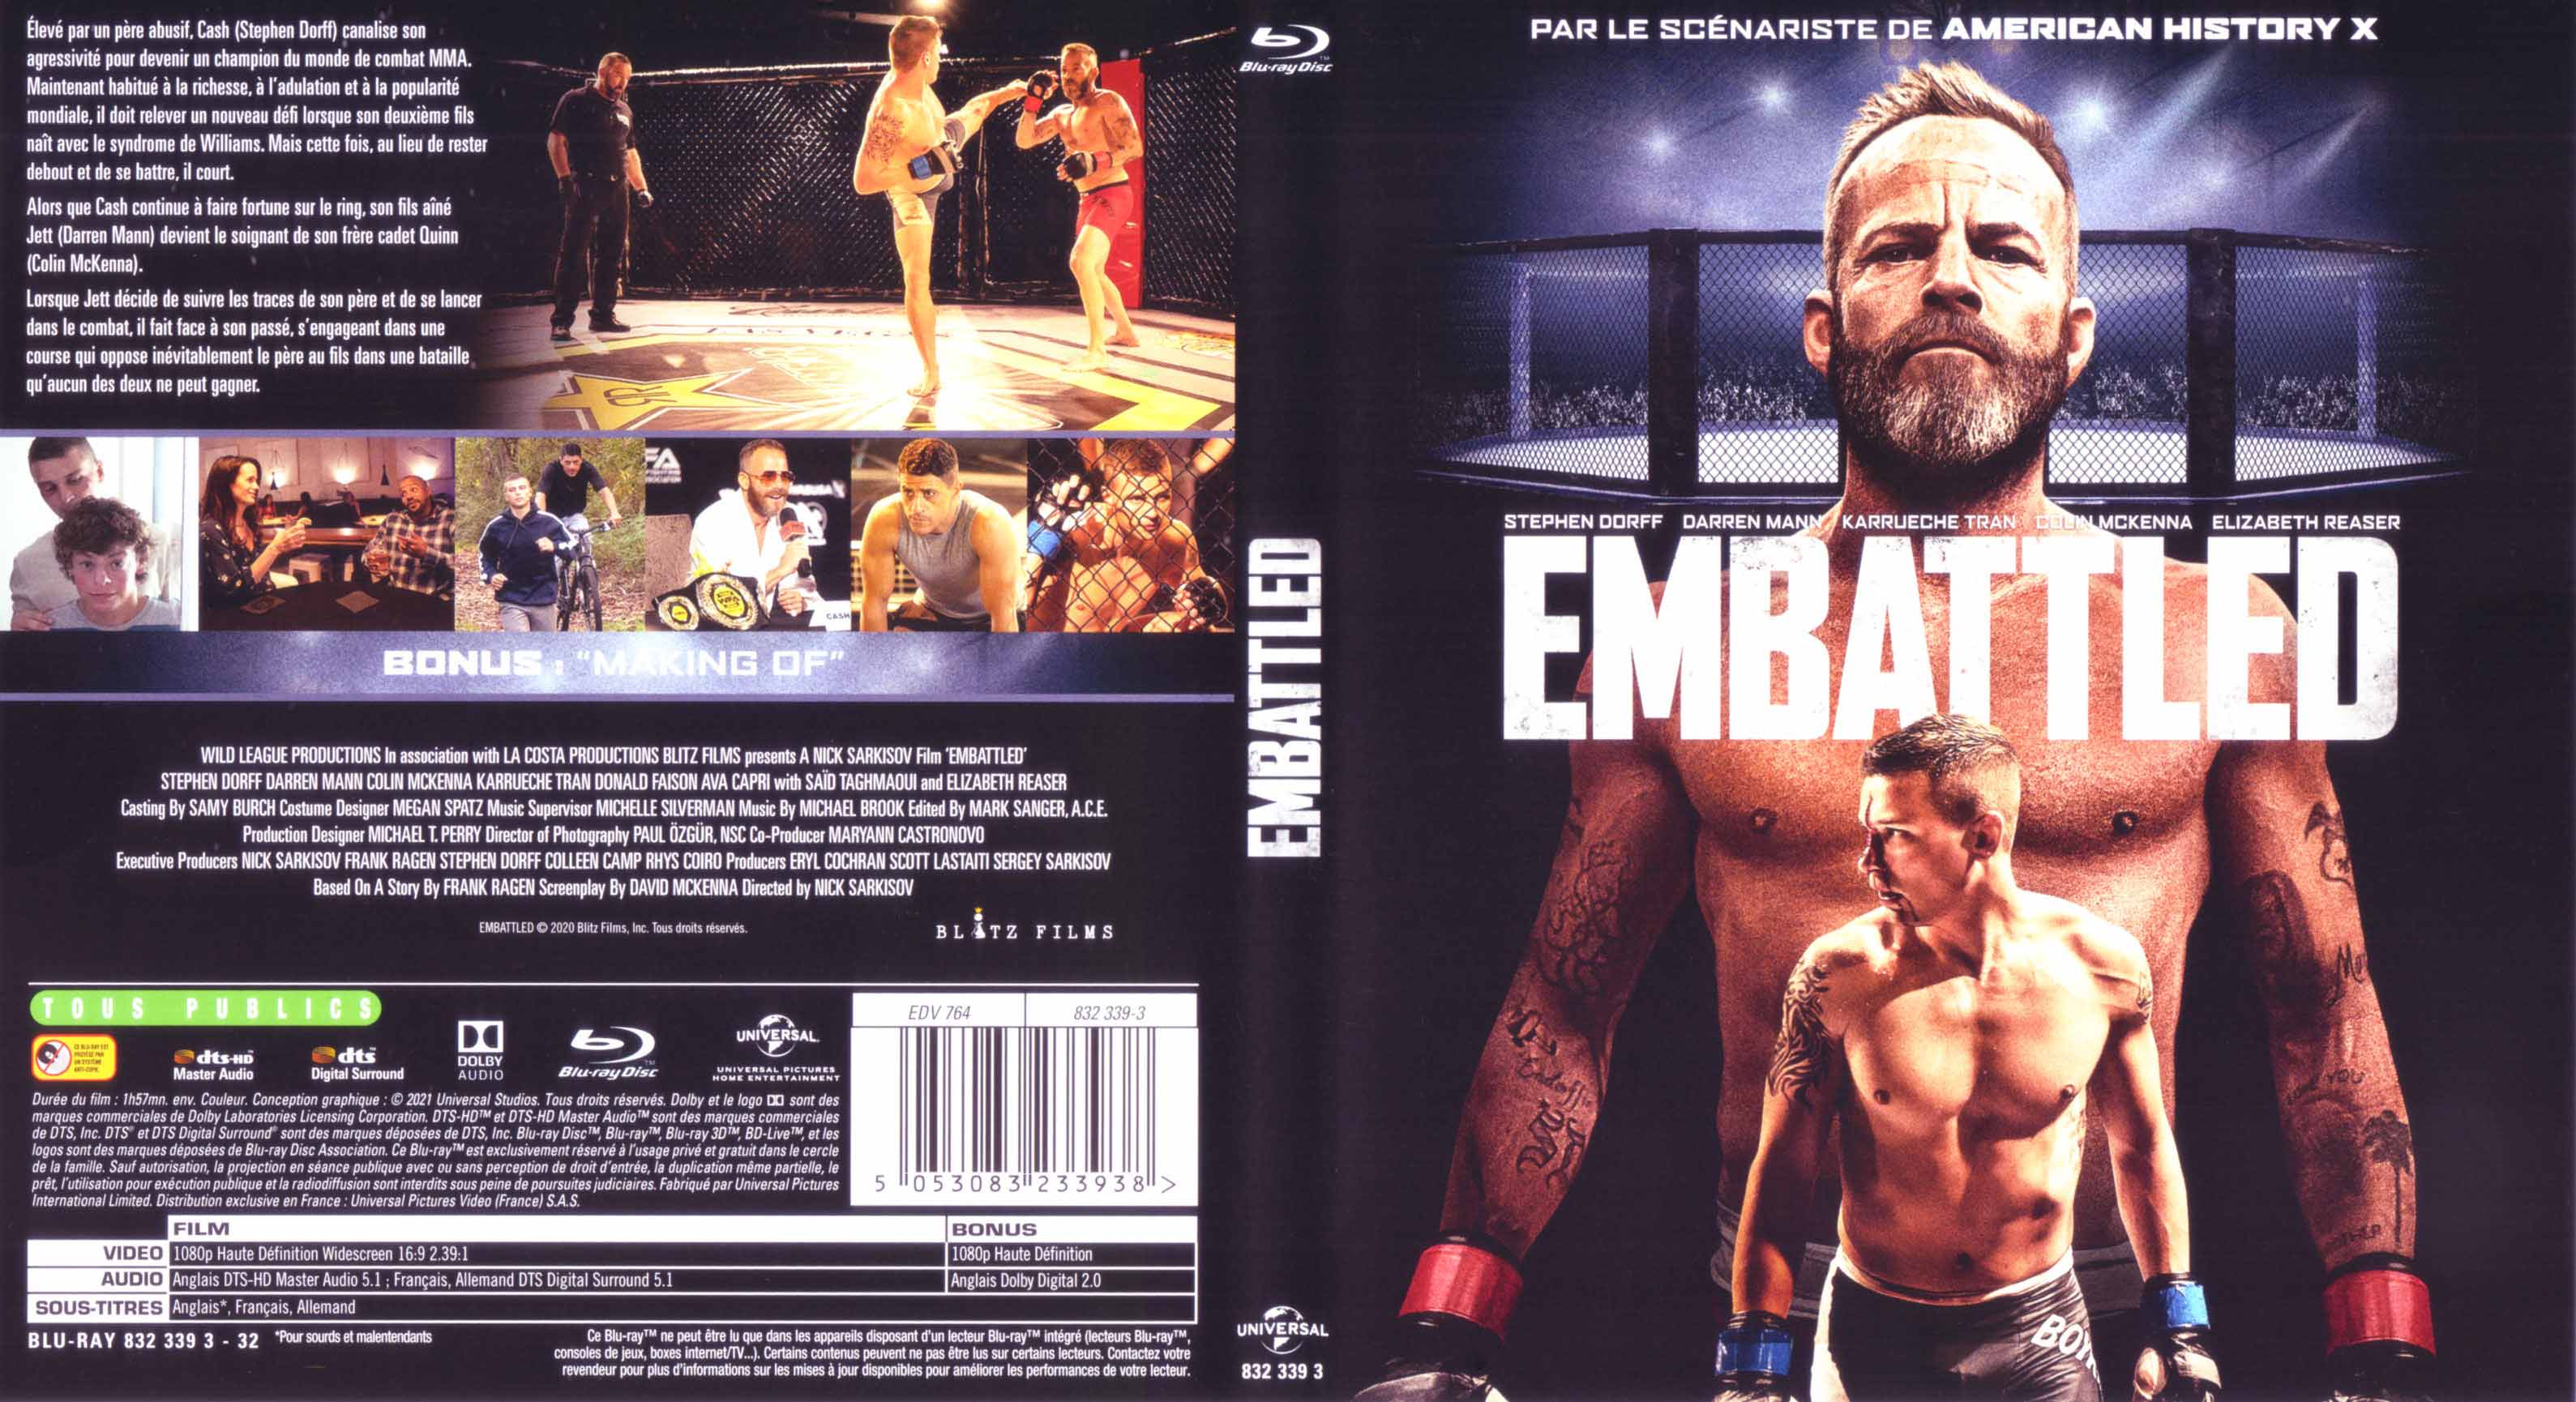 Jaquette DVD Embattled (BLU-RAY)